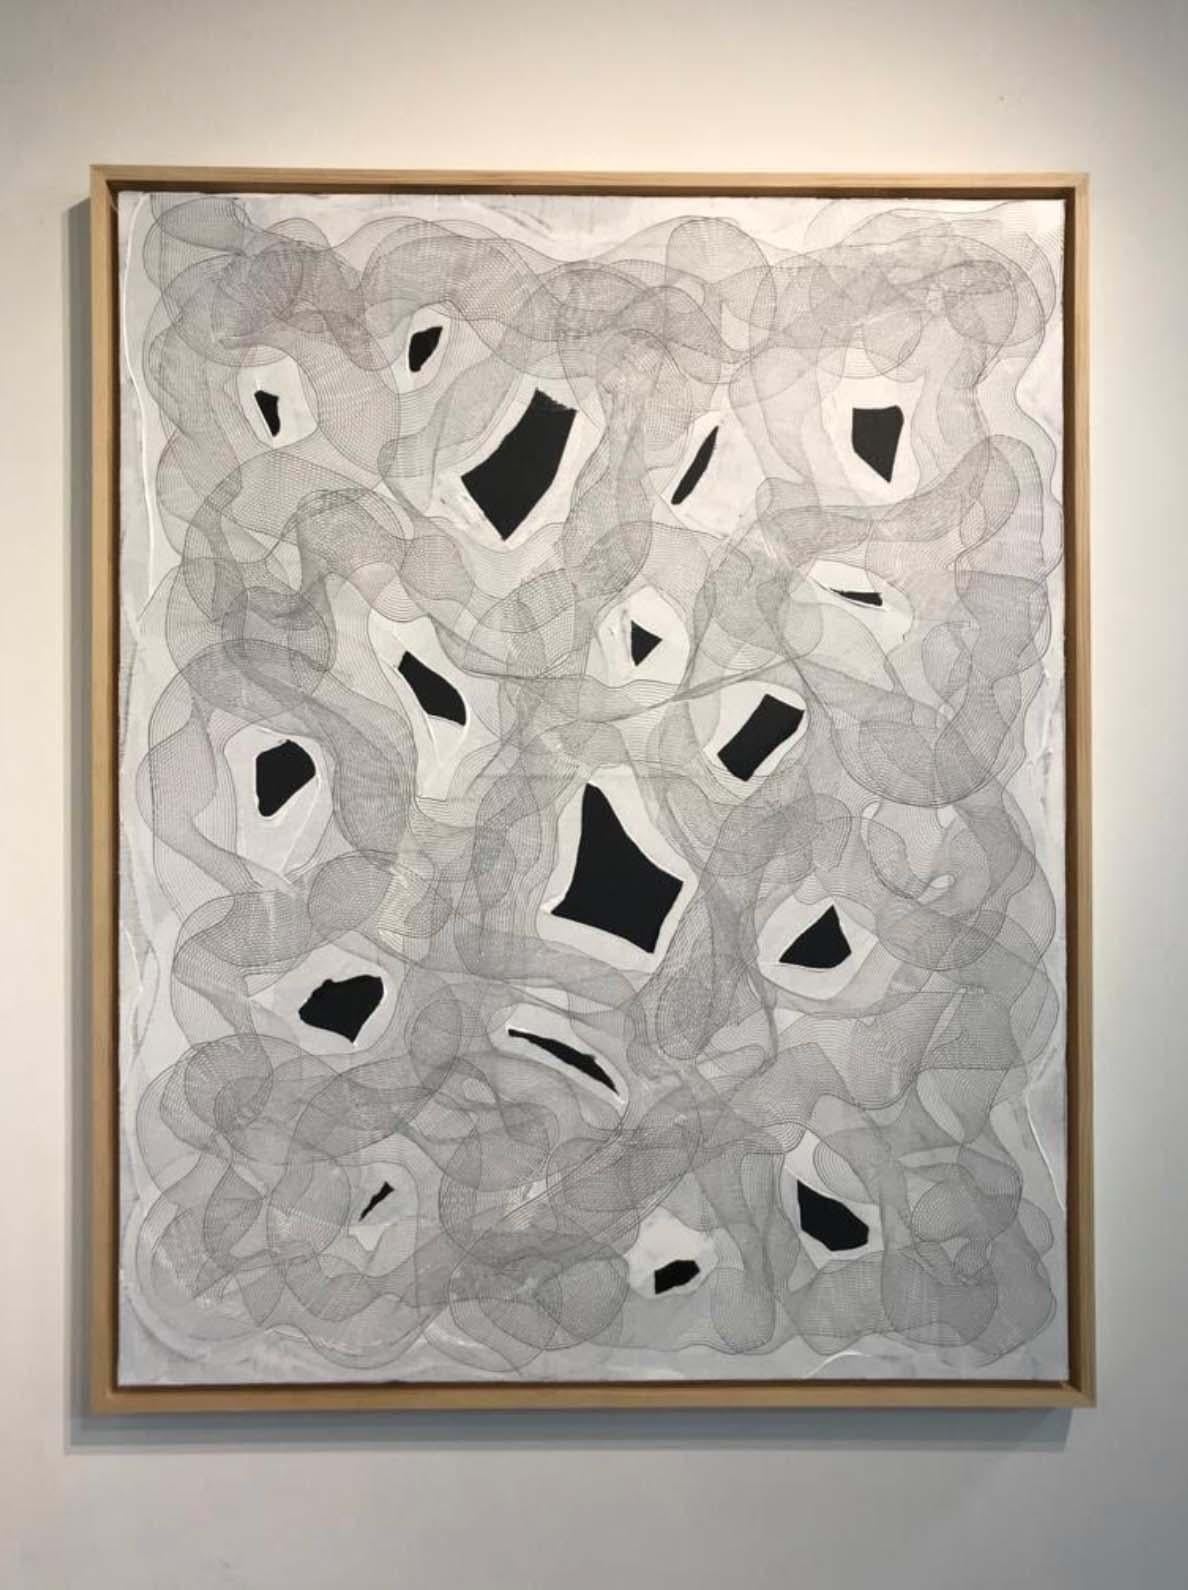 Abstract black and white painting by Ted Collier in his linear series.